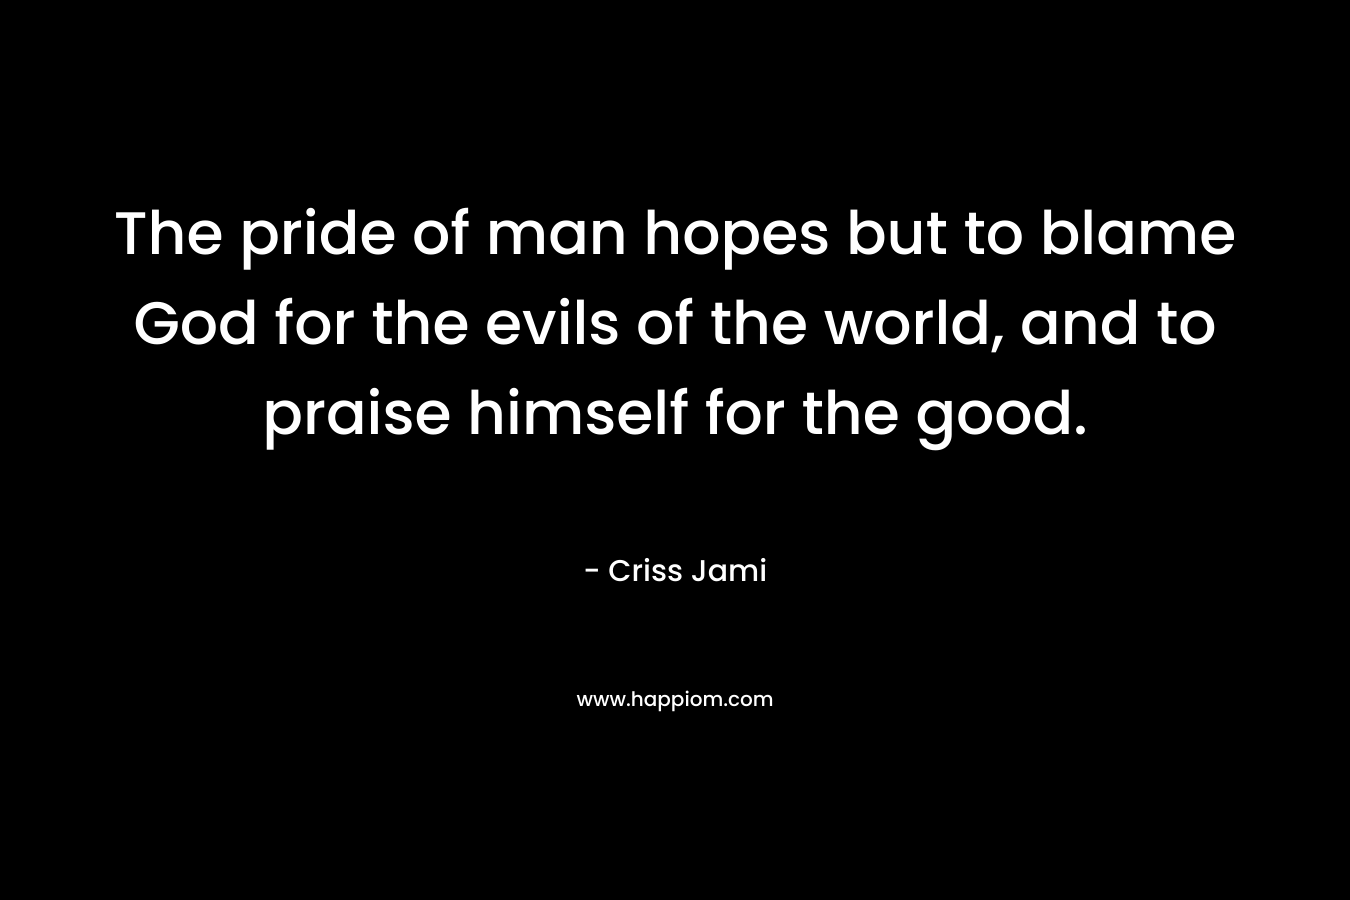 The pride of man hopes but to blame God for the evils of the world, and to praise himself for the good.